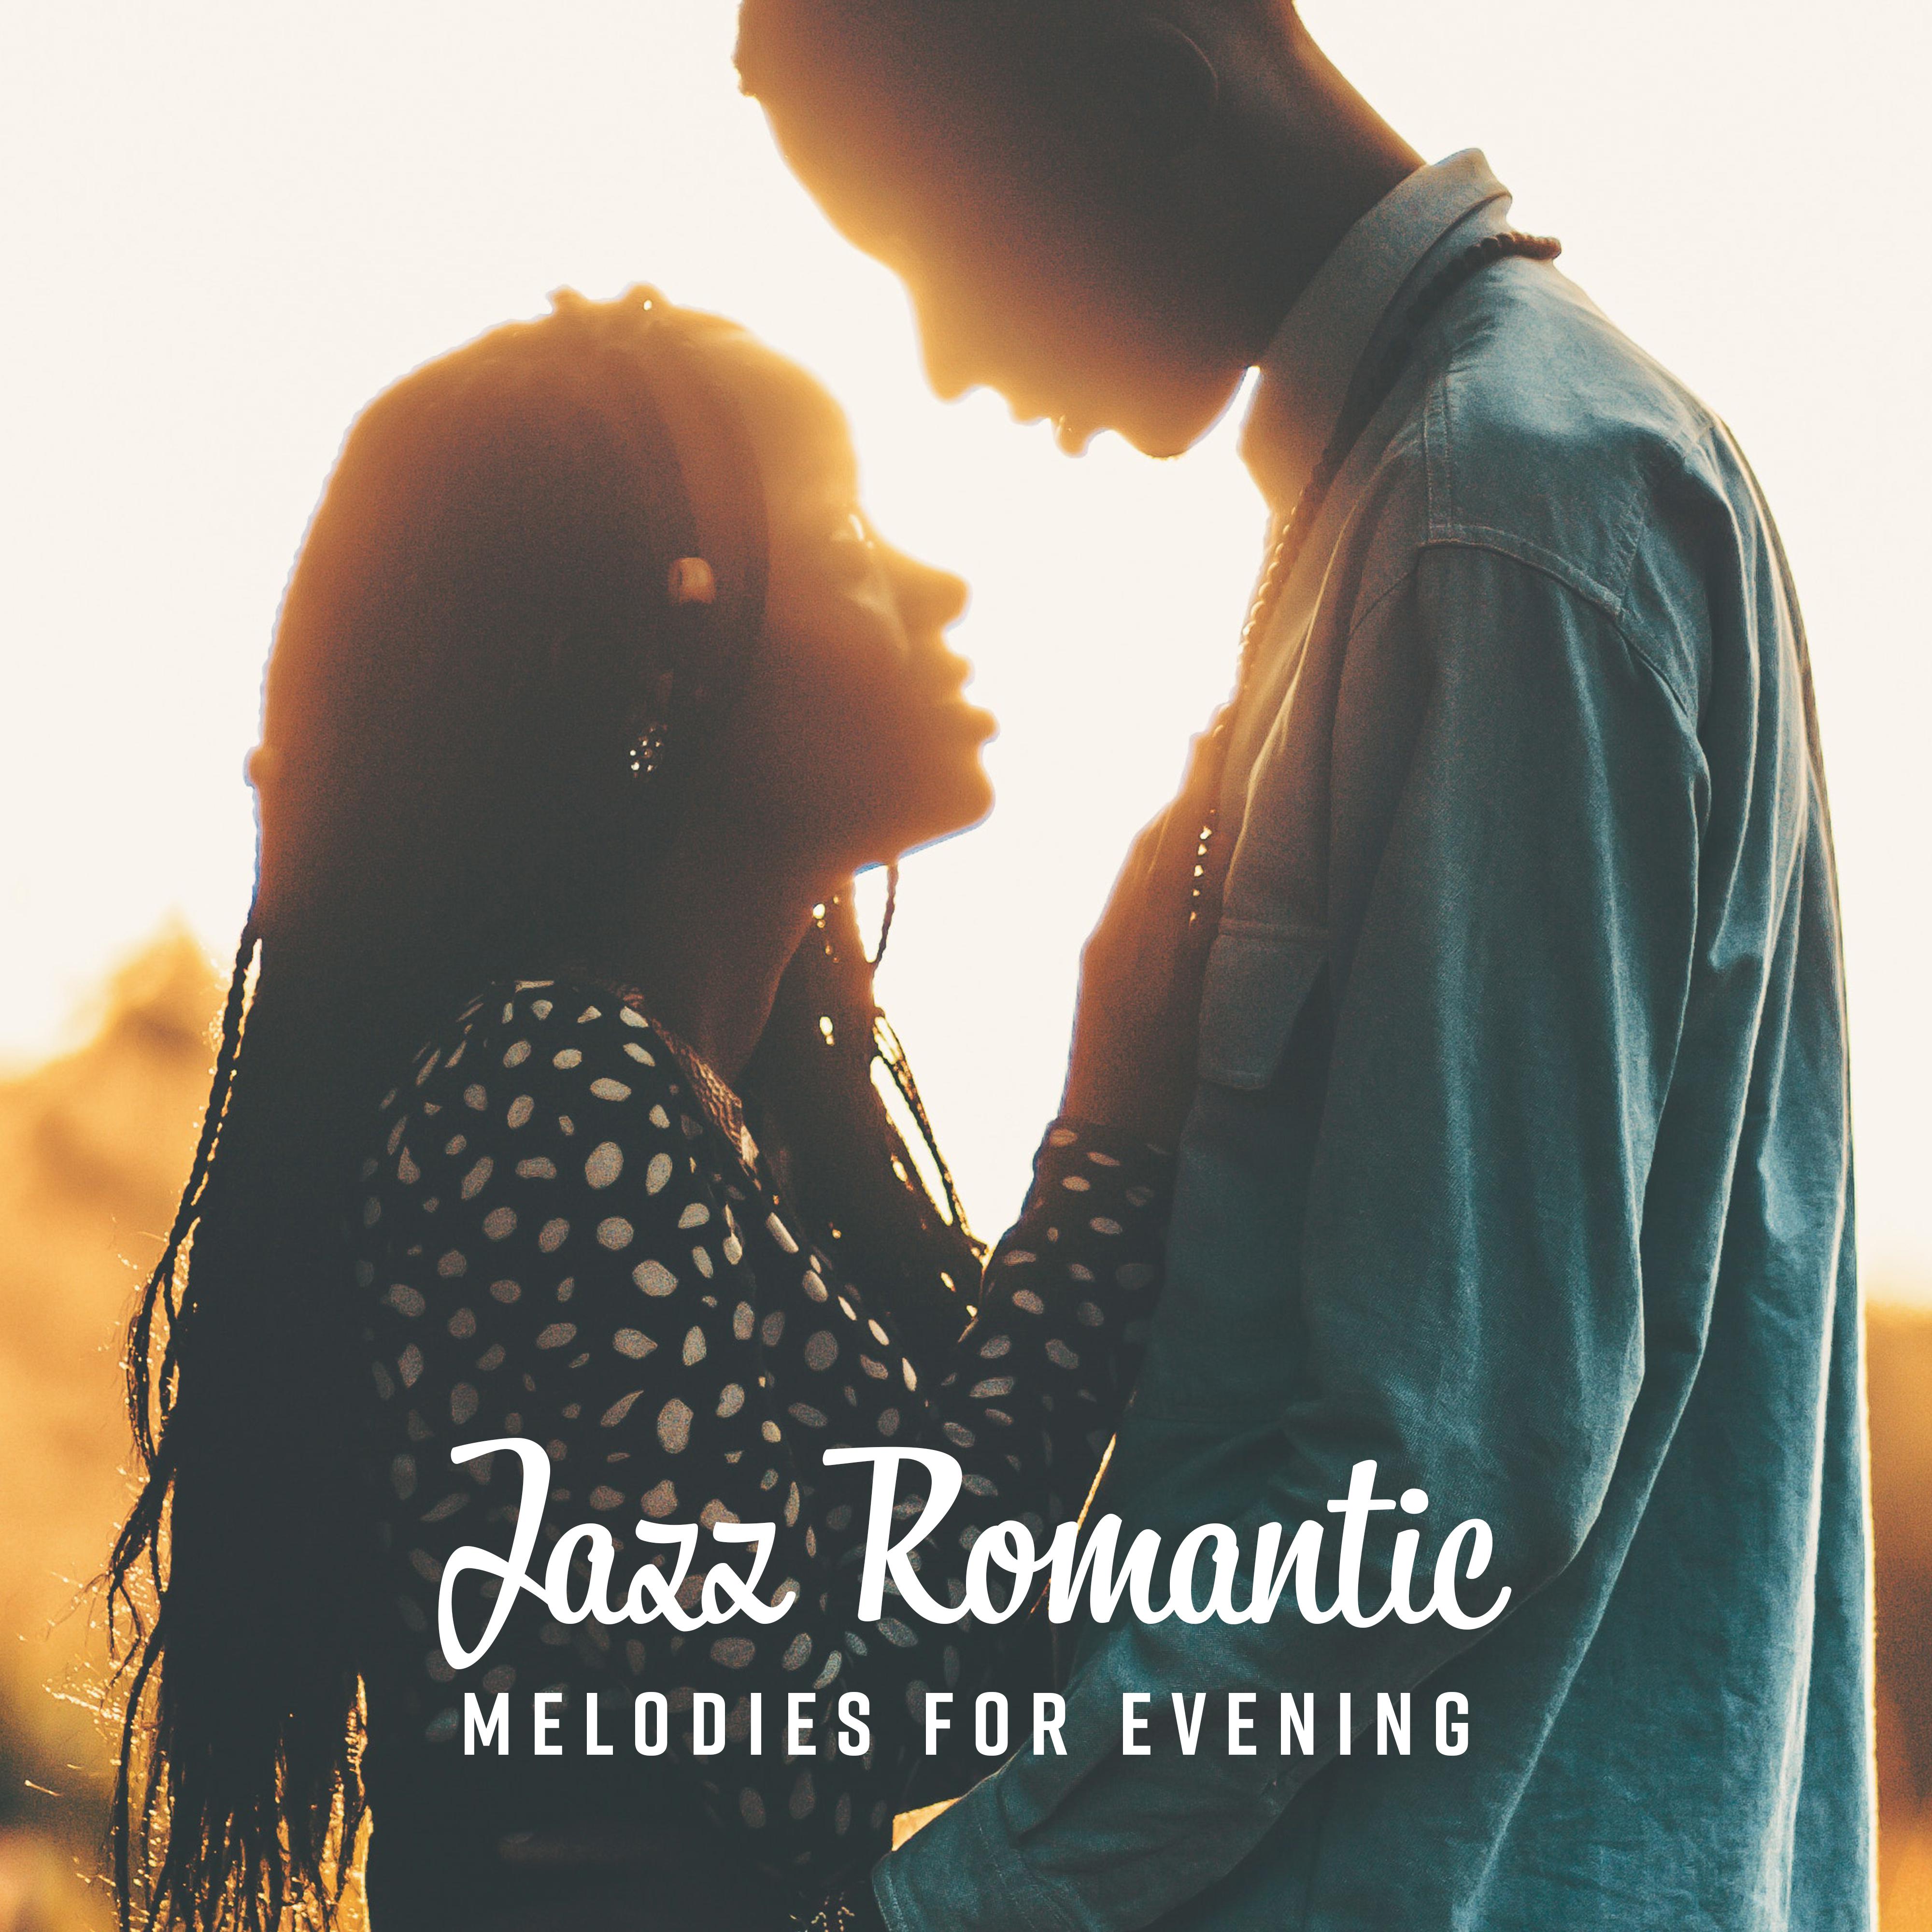 Jazz Romantic Melodies for Evening